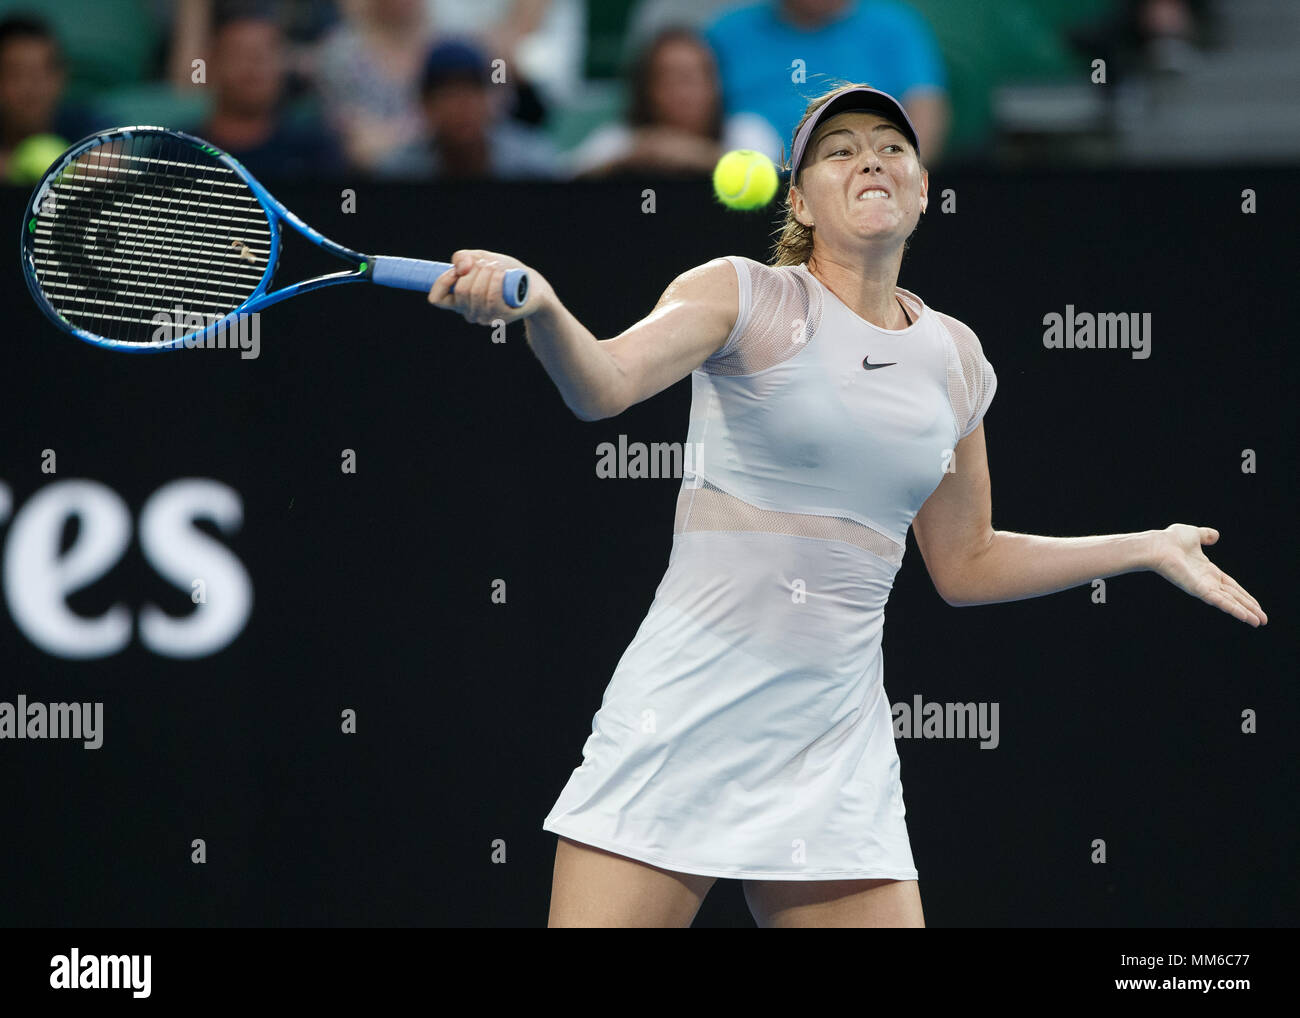 Russian player playing forehand shot in Australian Open 2018 Tournament, Melbourne Park, Melbourne, Victoria, Australia Stock Photo - Alamy